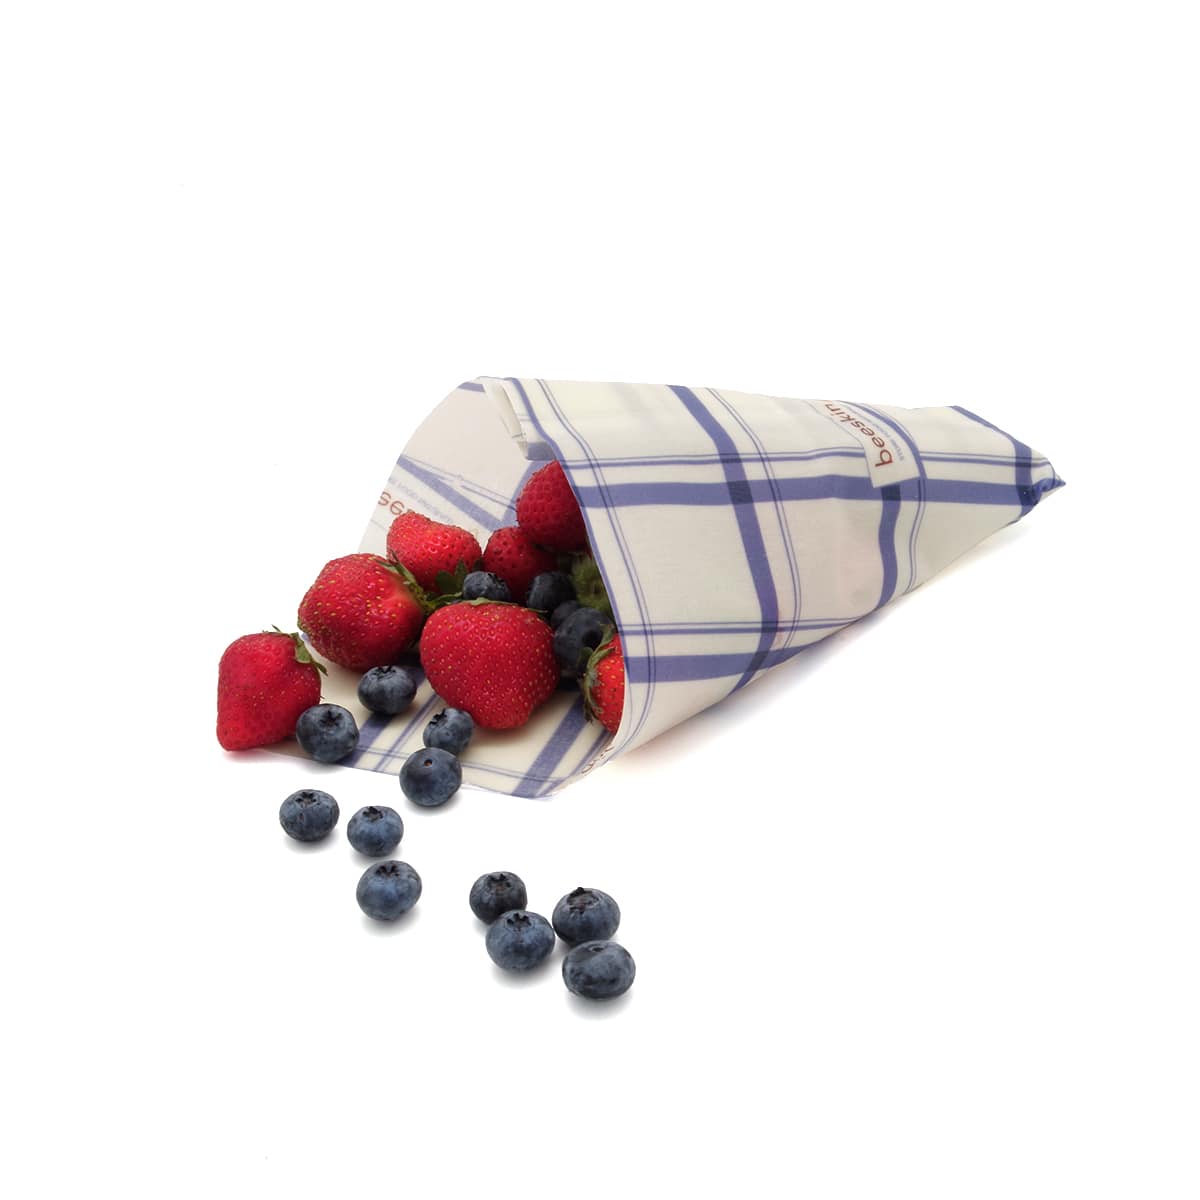 beeskin size m kitchen towel folded to carry berries